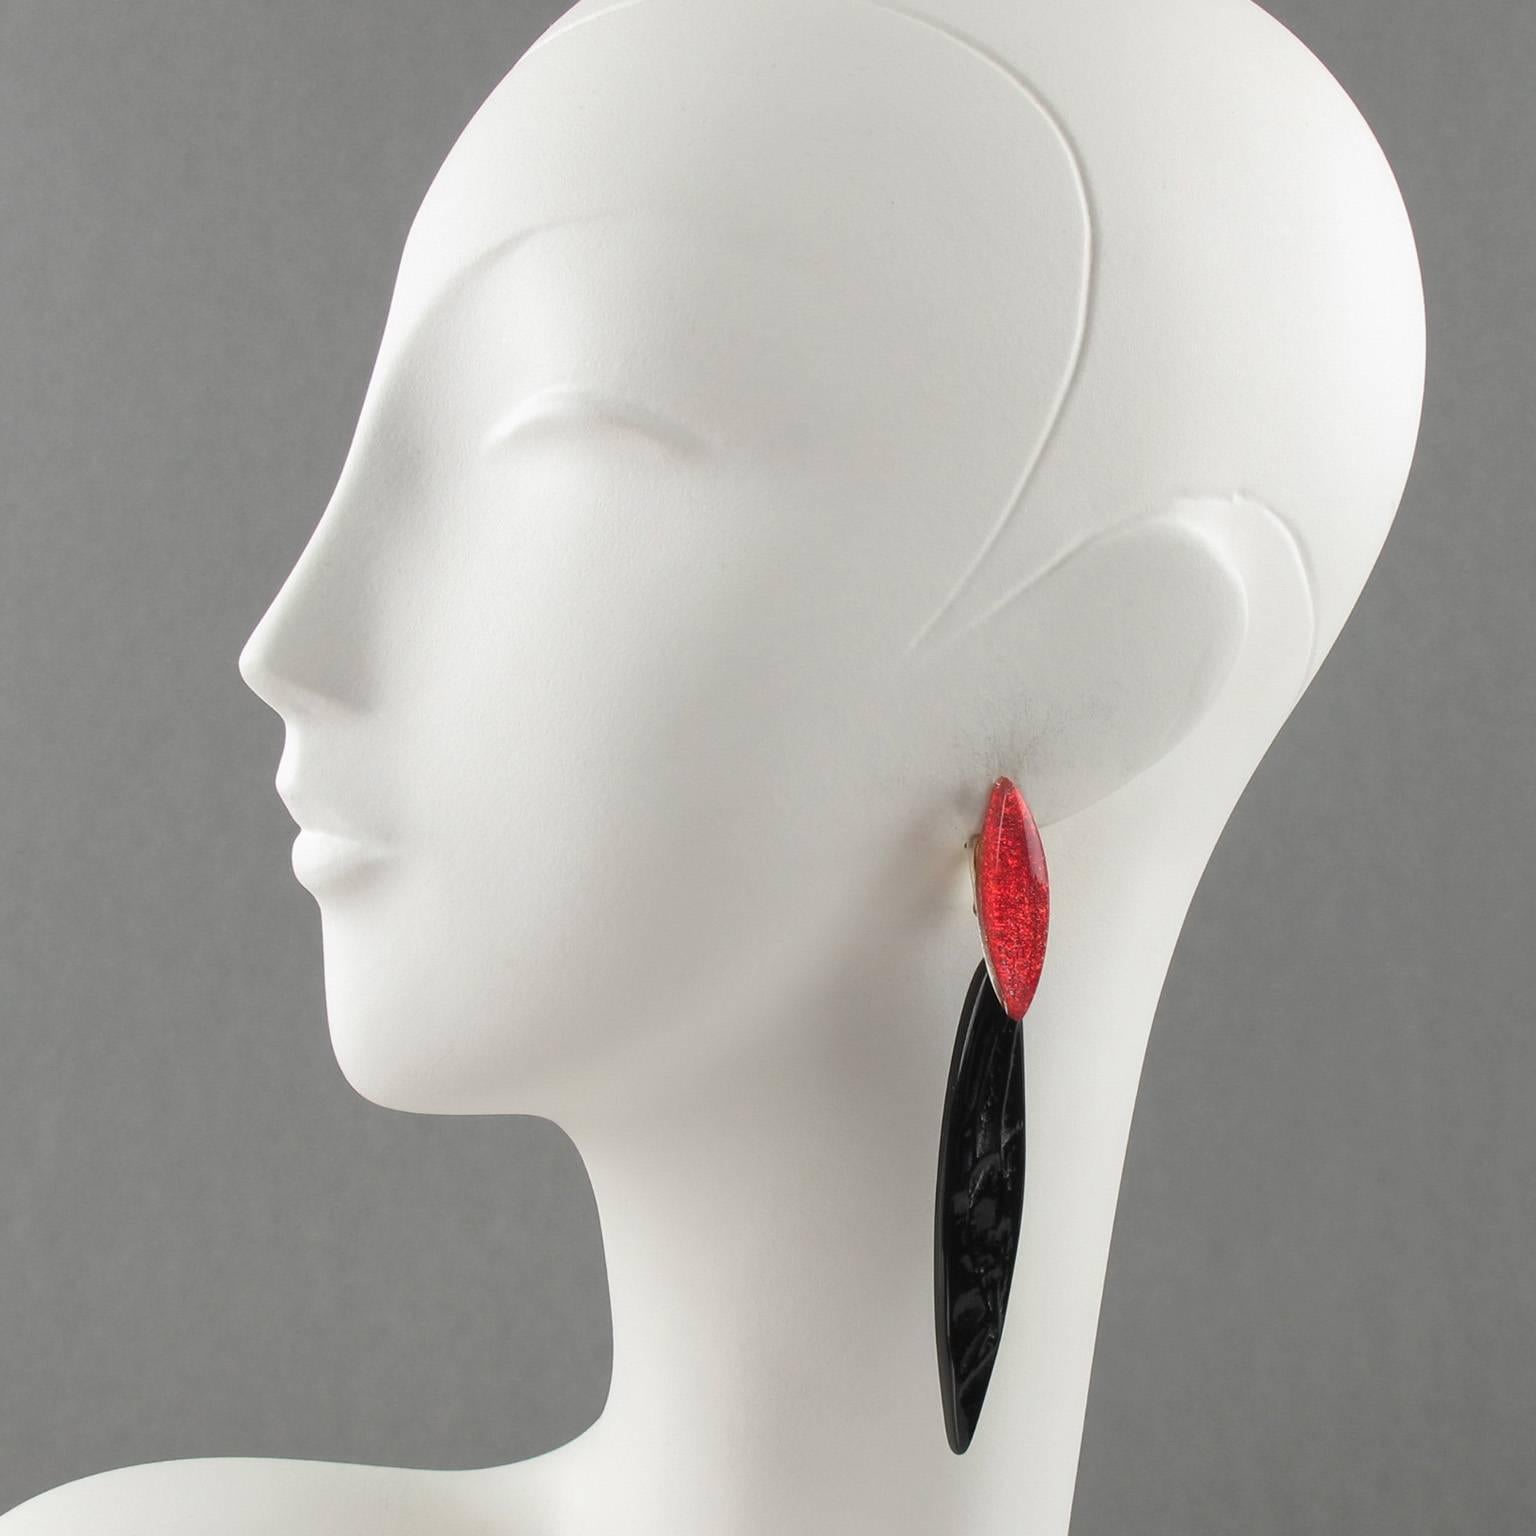 Stunning artisan designer oversized shoulder duster clip on earrings. Minimalist slim design with dangling shape, black resin in free-form carved design with textured pattern, compliment with long drop clear lucite element with red glitter flakes